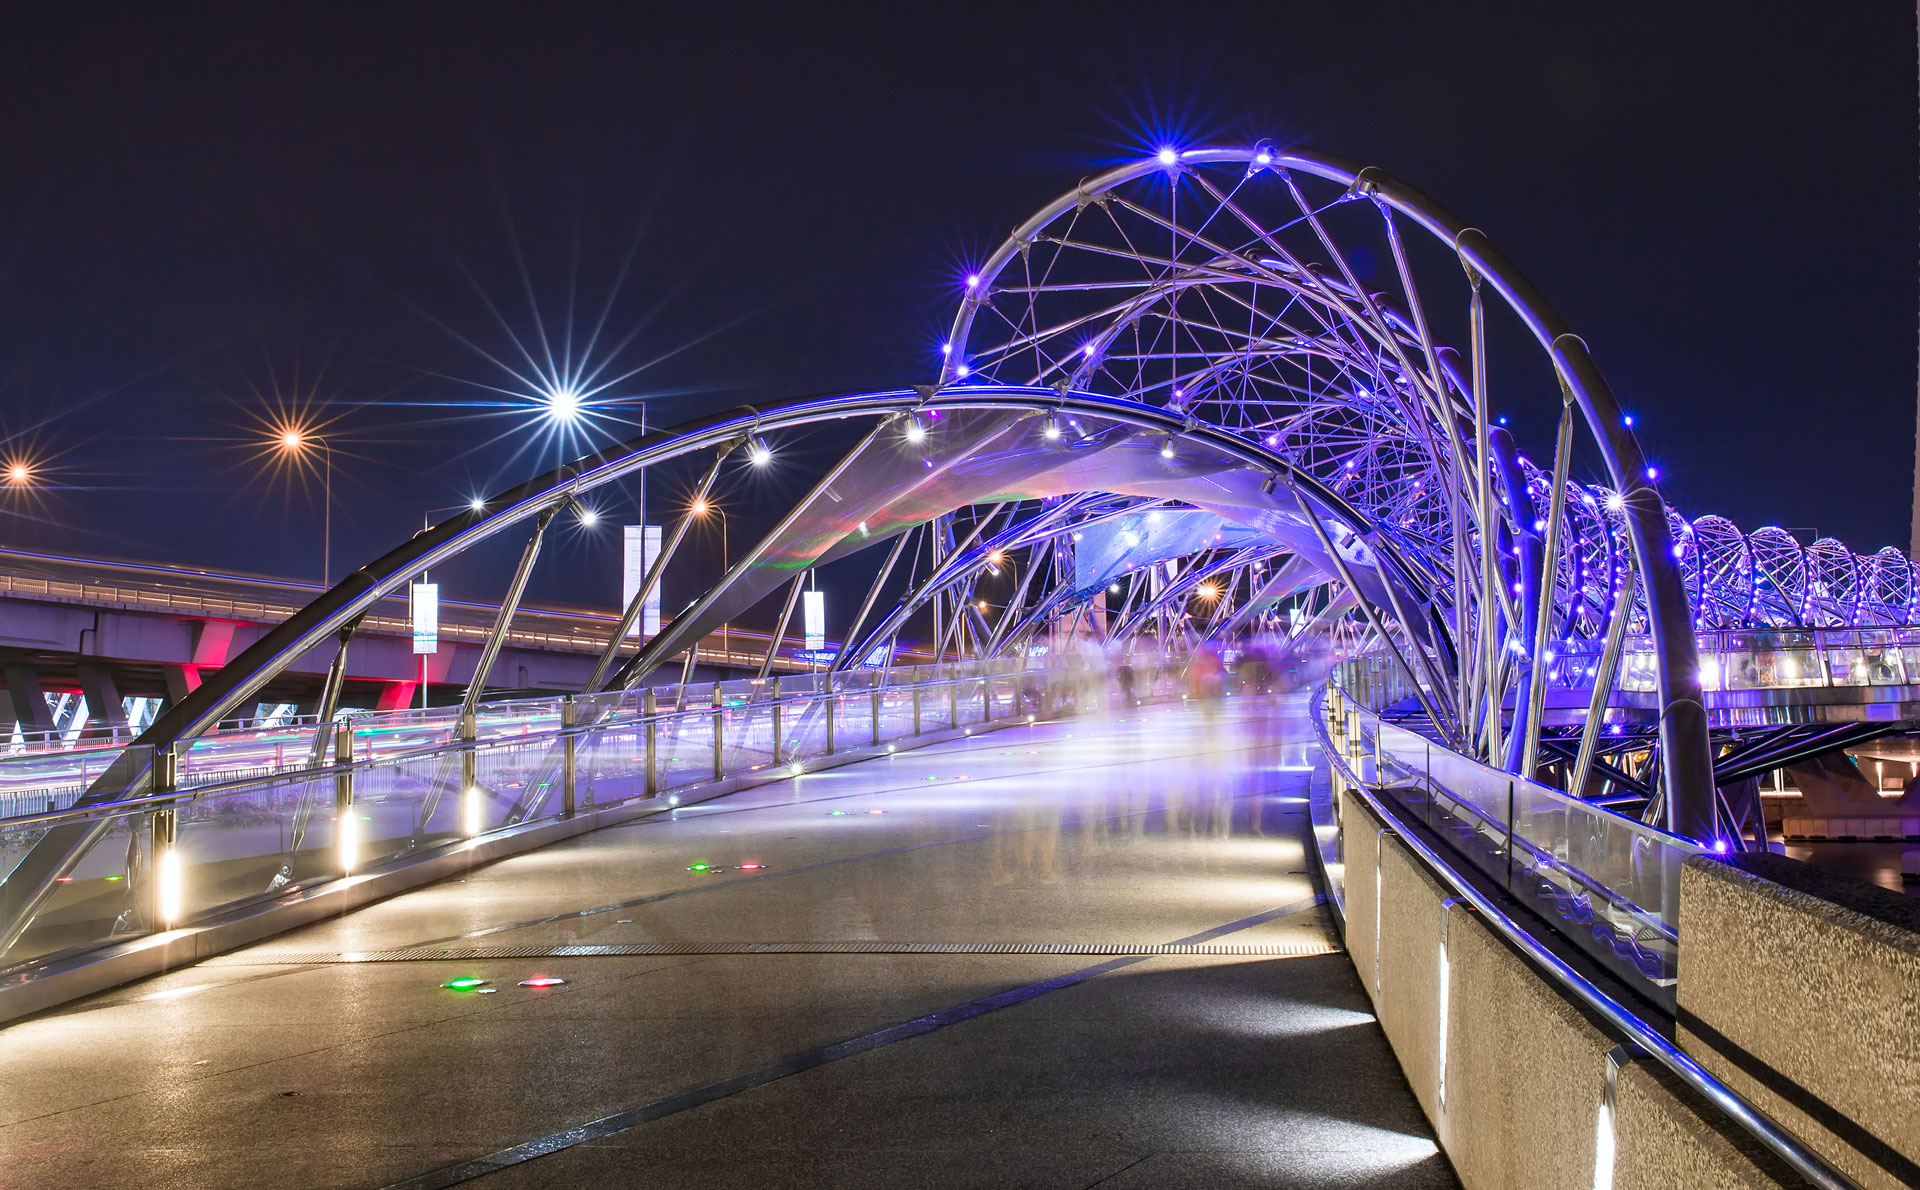 Architectural photo of a geometric bridge support lit up with purple lights